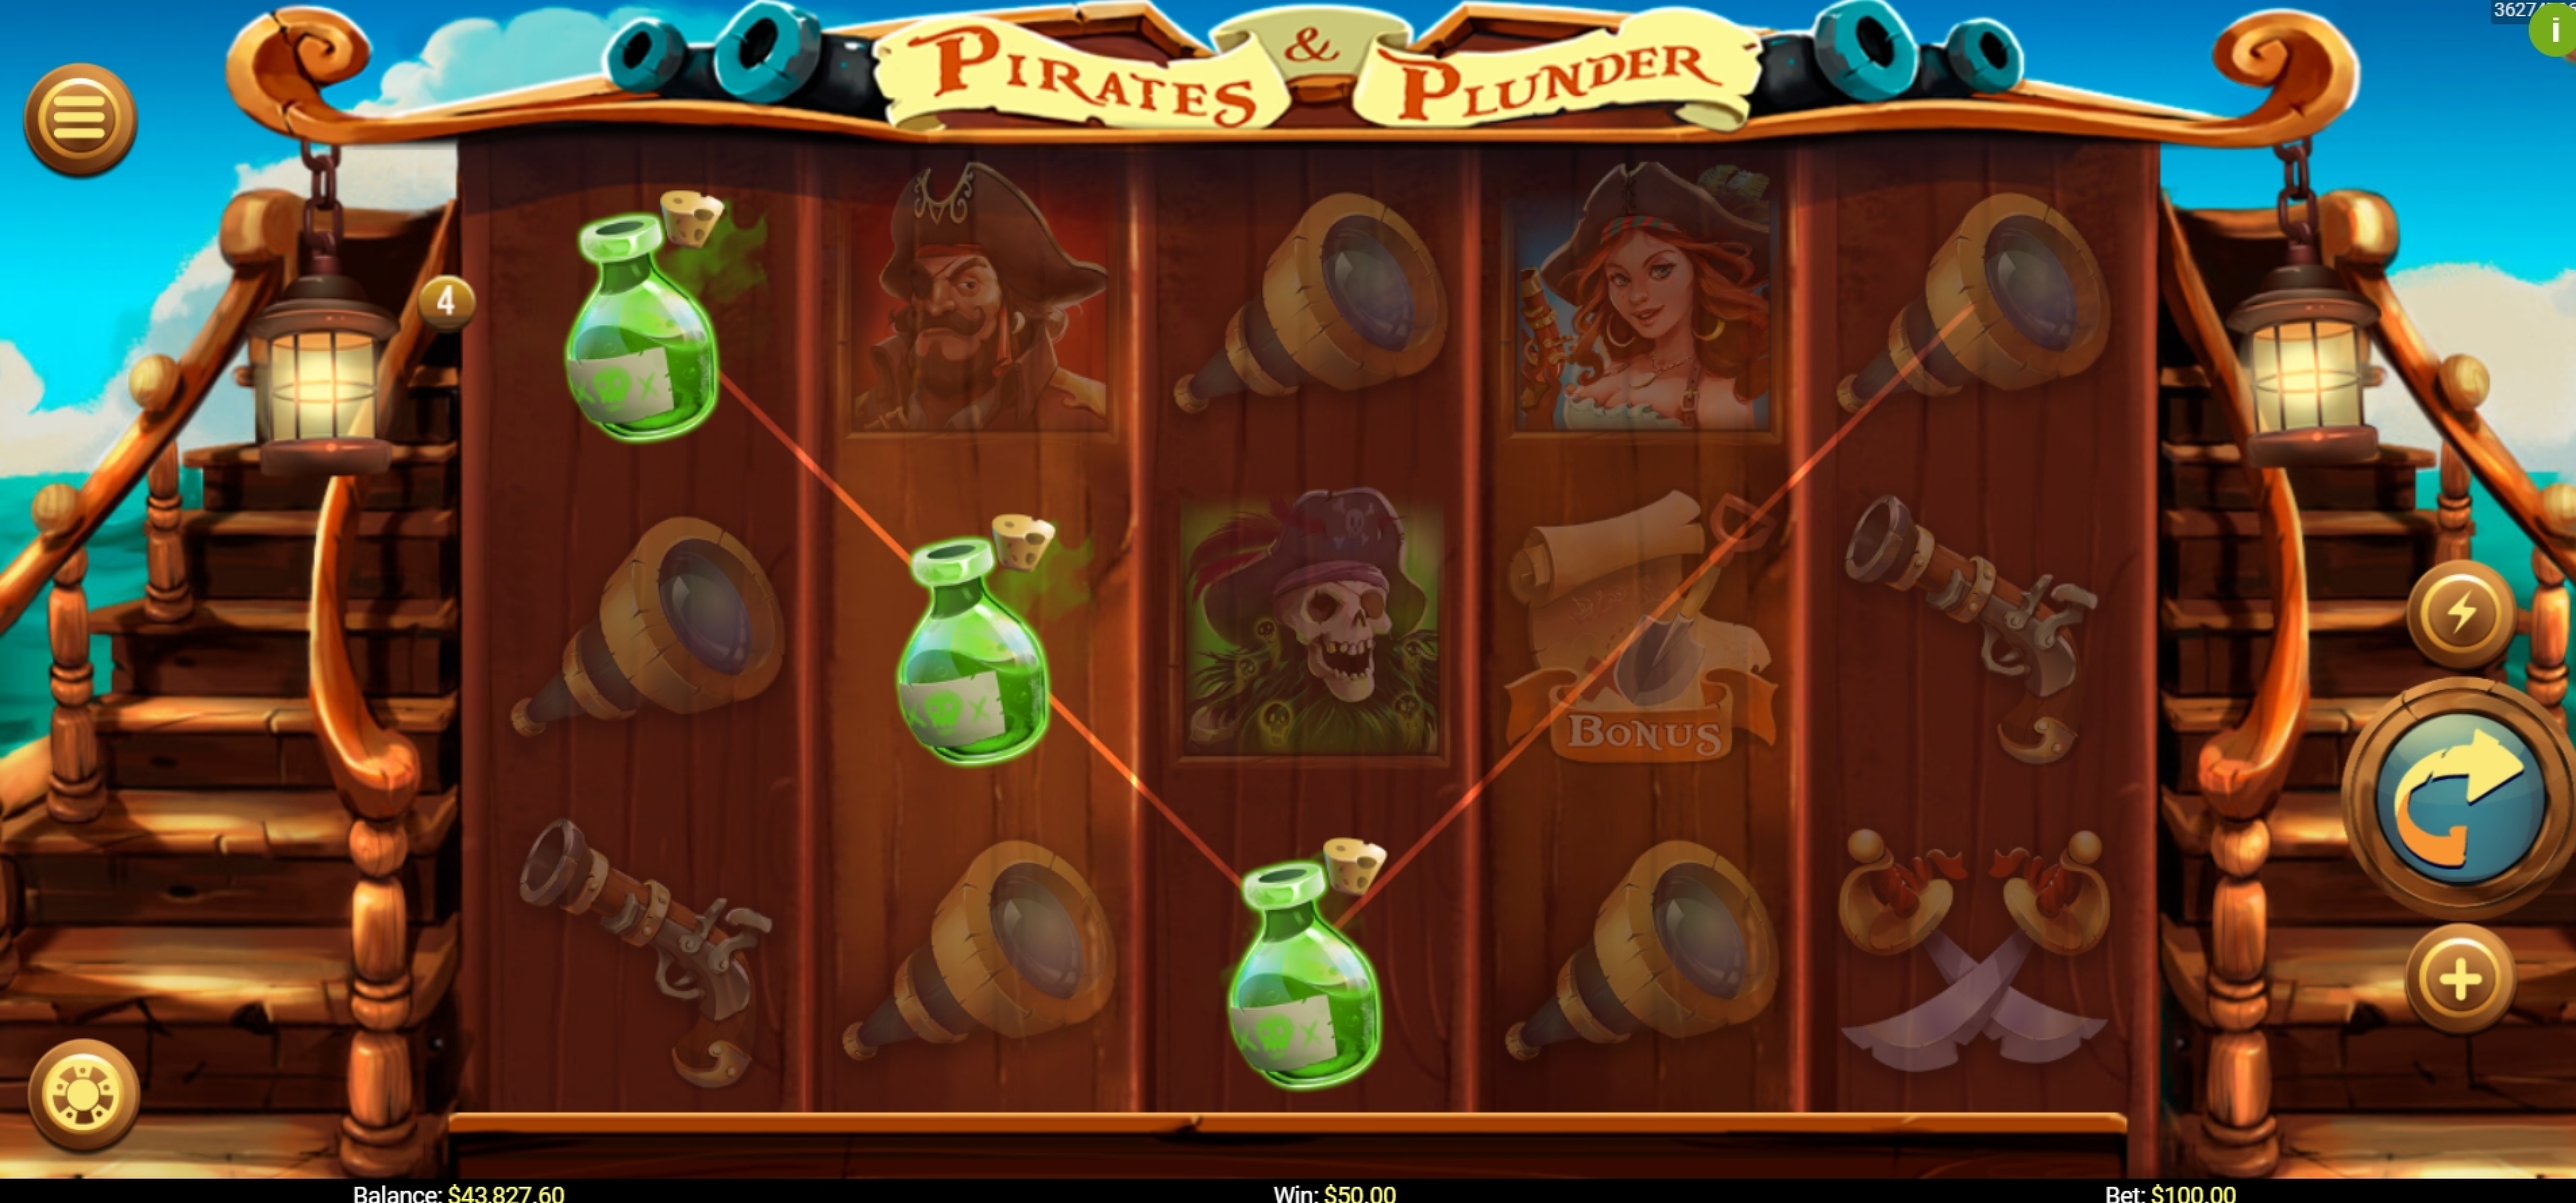 Win Money in Pirates and Plunder Free Slot Game by Mobilots